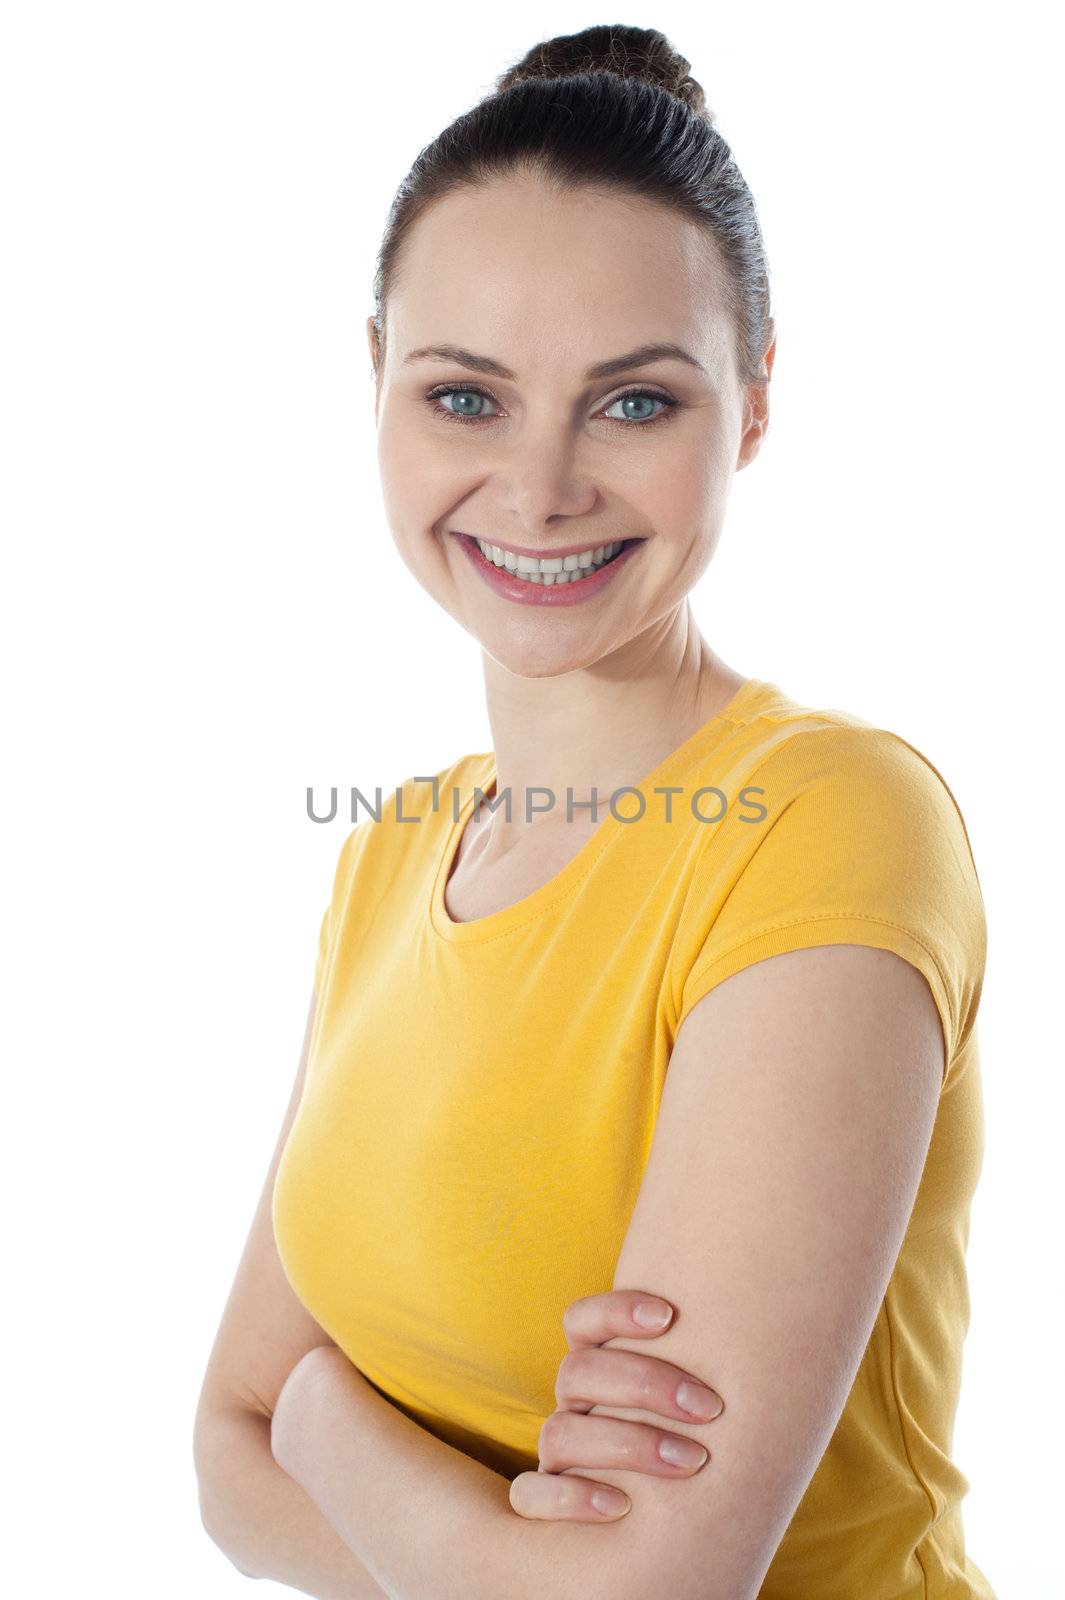 Smiling portrait of a skinny amarican teenager by stockyimages